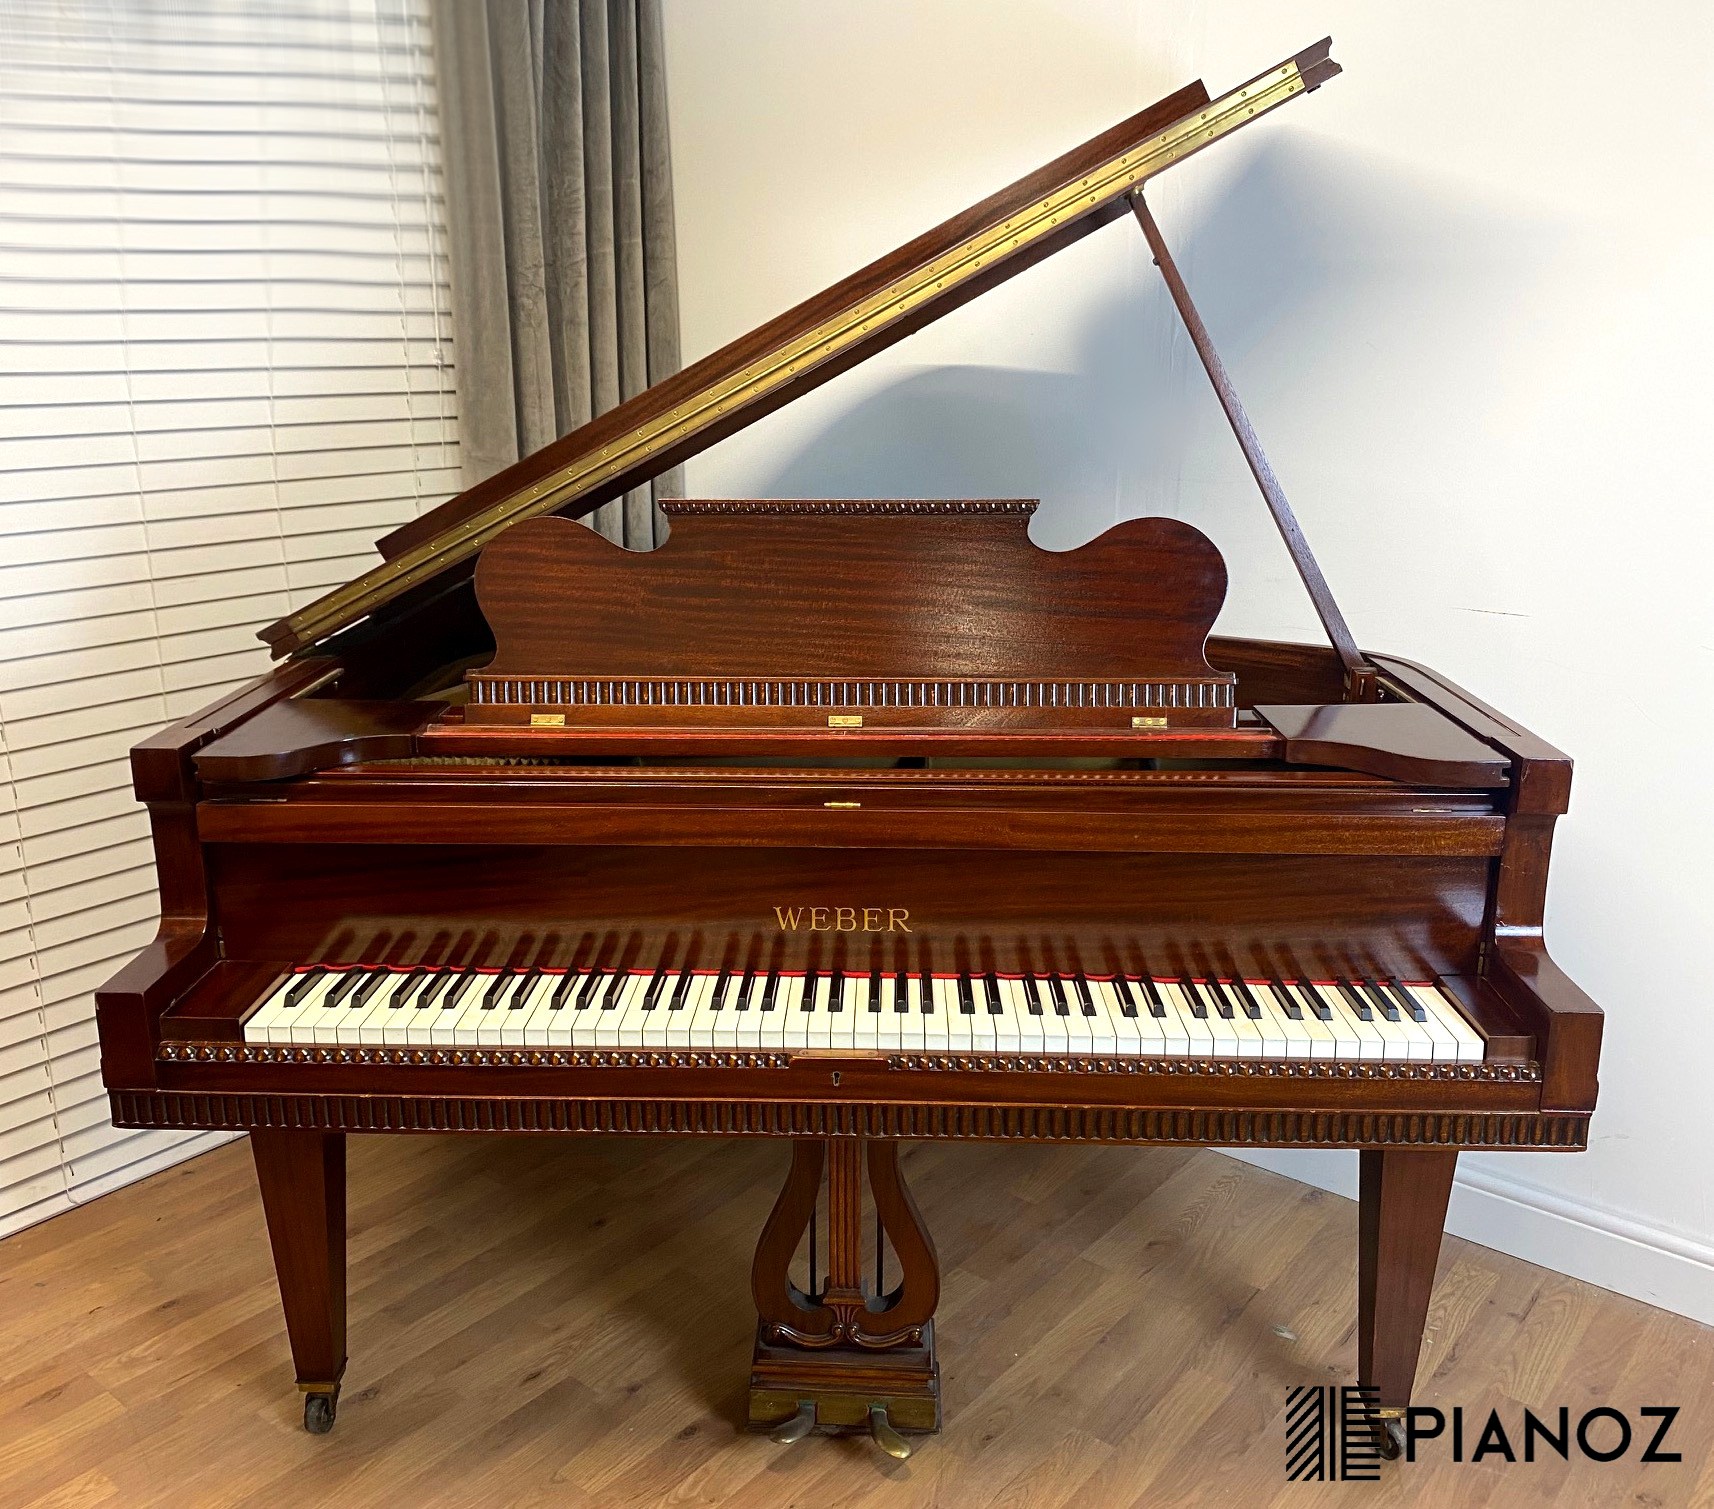 Weber Restored Baby Grand Piano piano for sale in UK